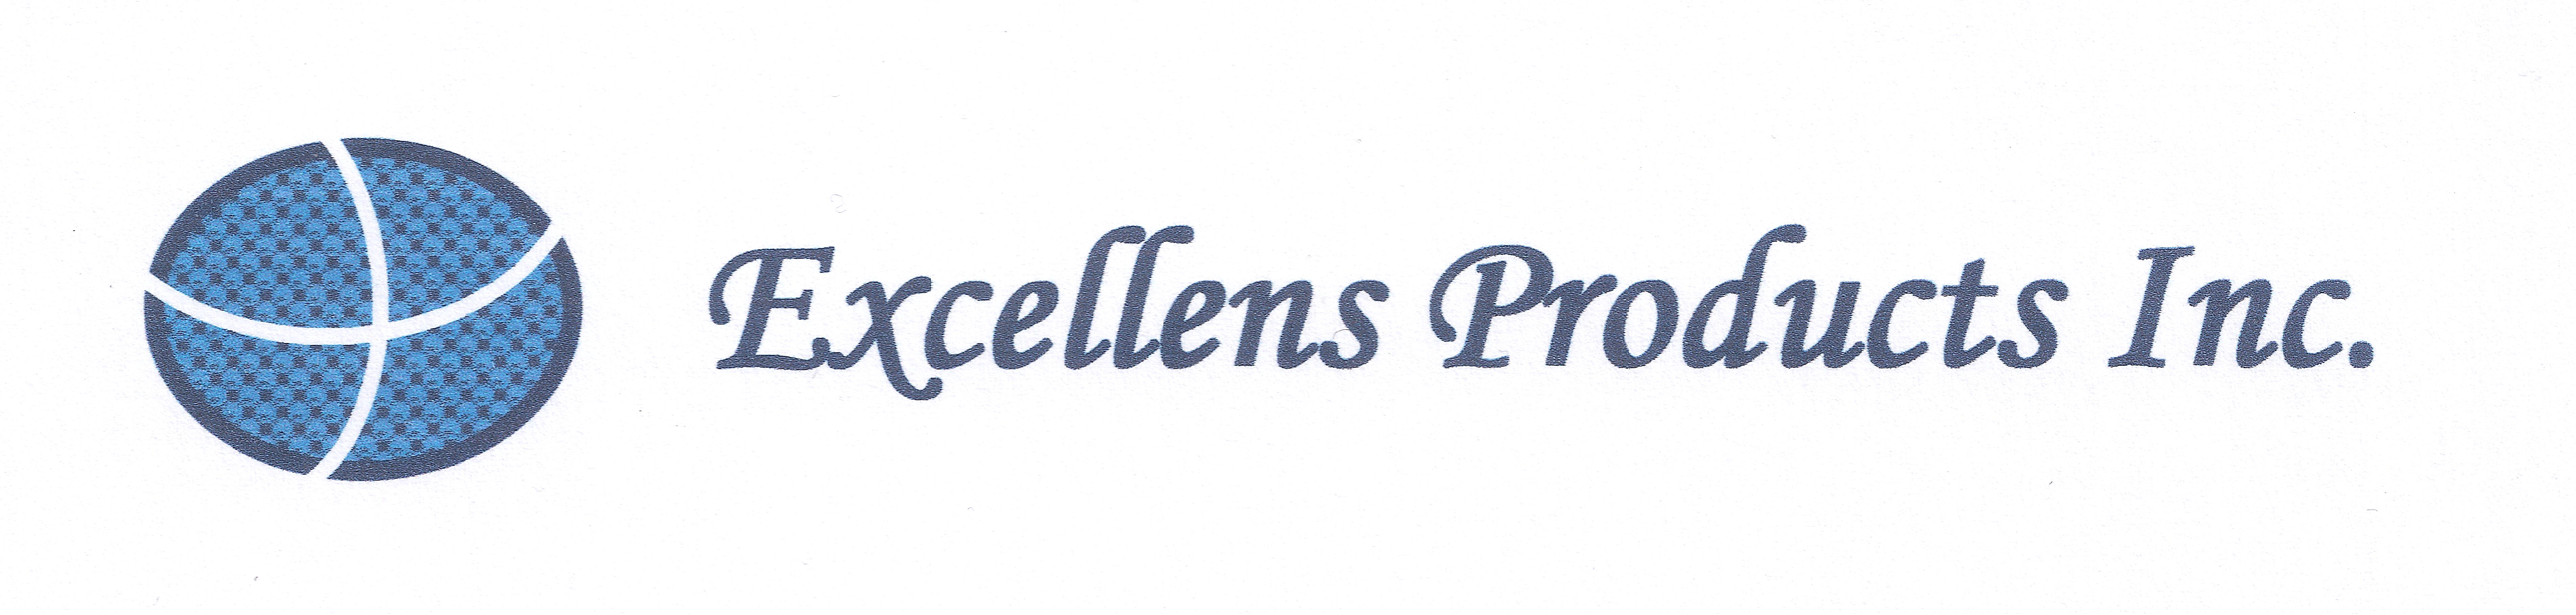 Excellens Products